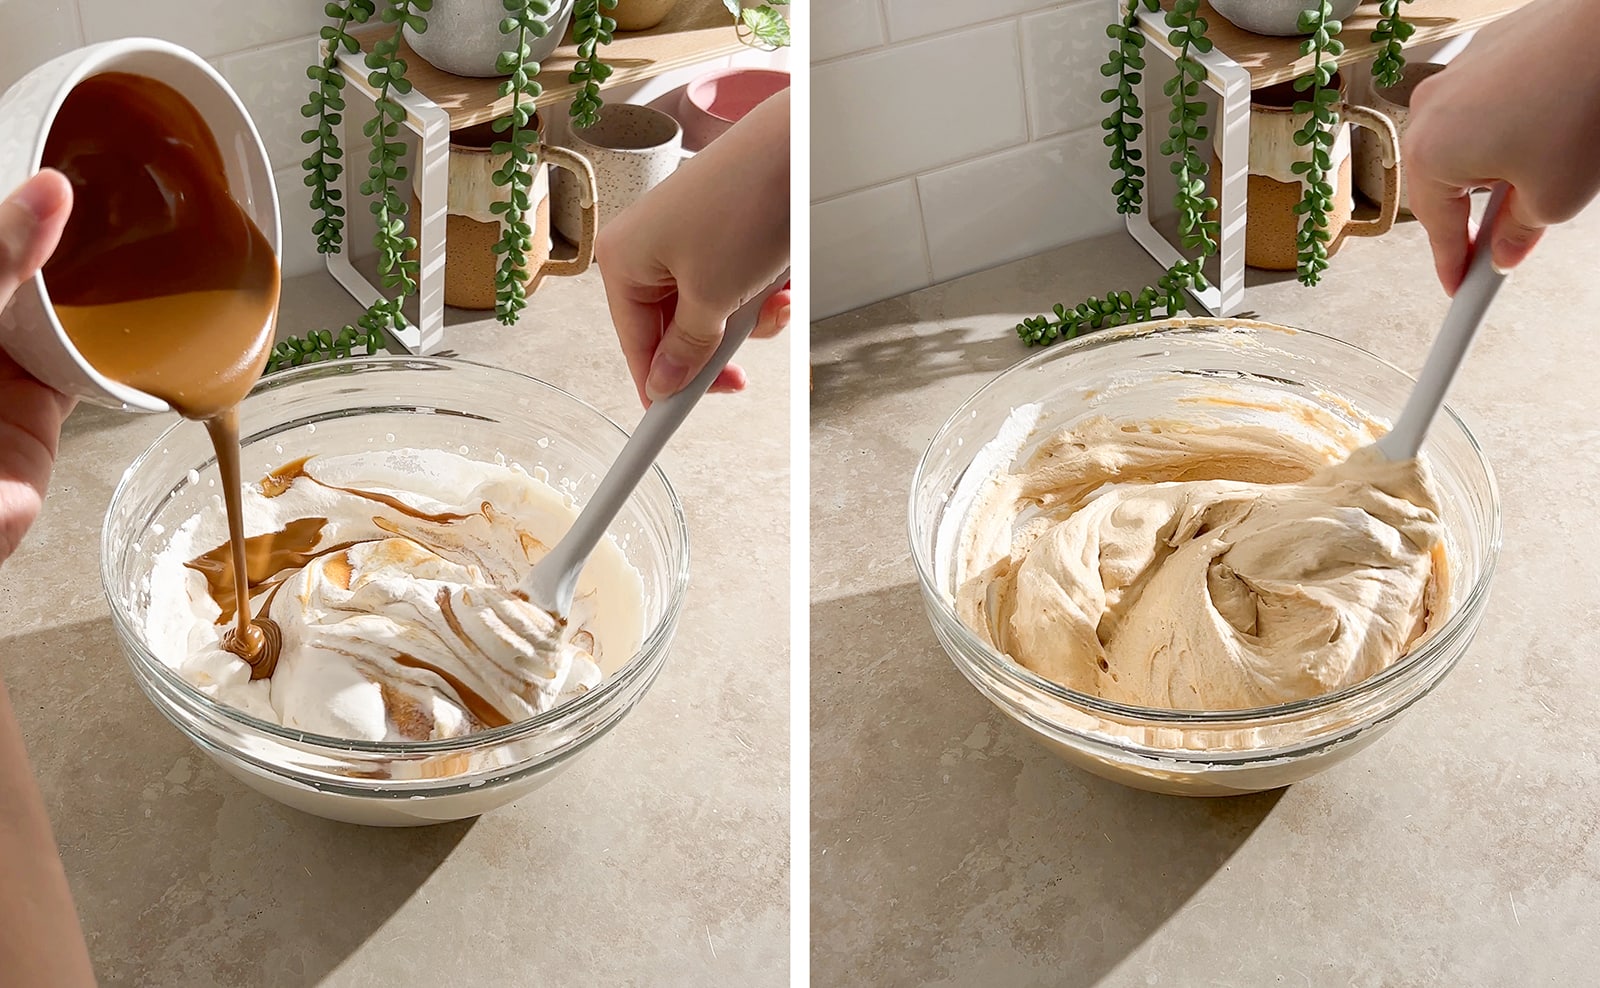 Left to right: pouring biscoff spread into bowl of whipped cream while folding with spatula in the other hand, folding biscoff cream in bowl.